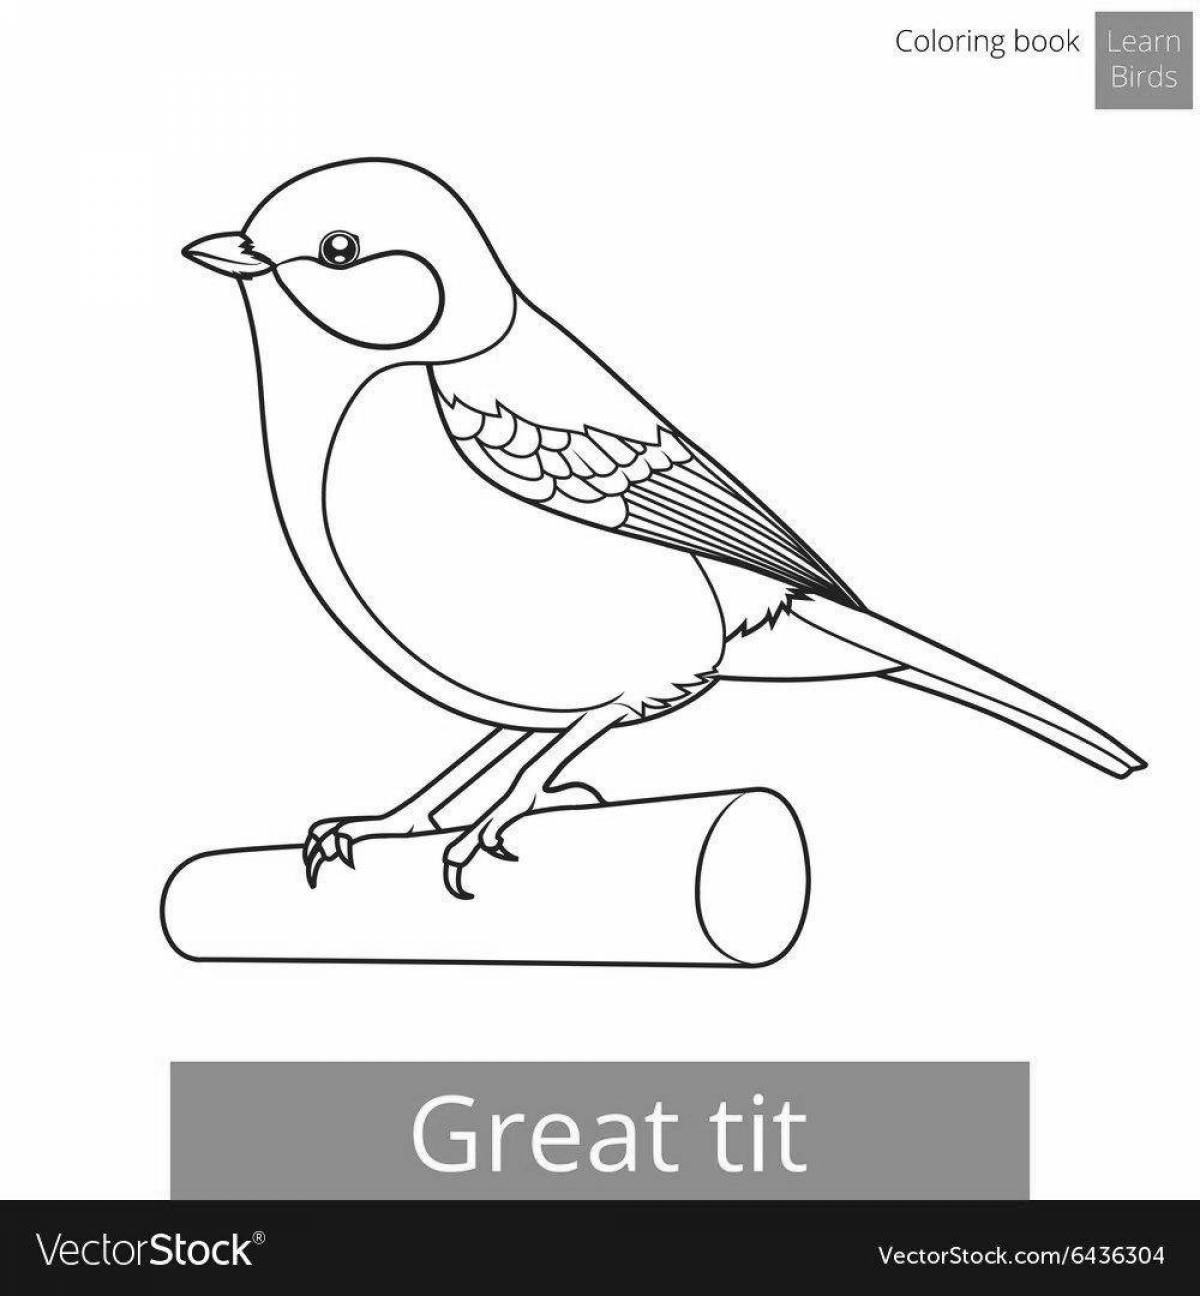 Attractive drawing of a titmouse